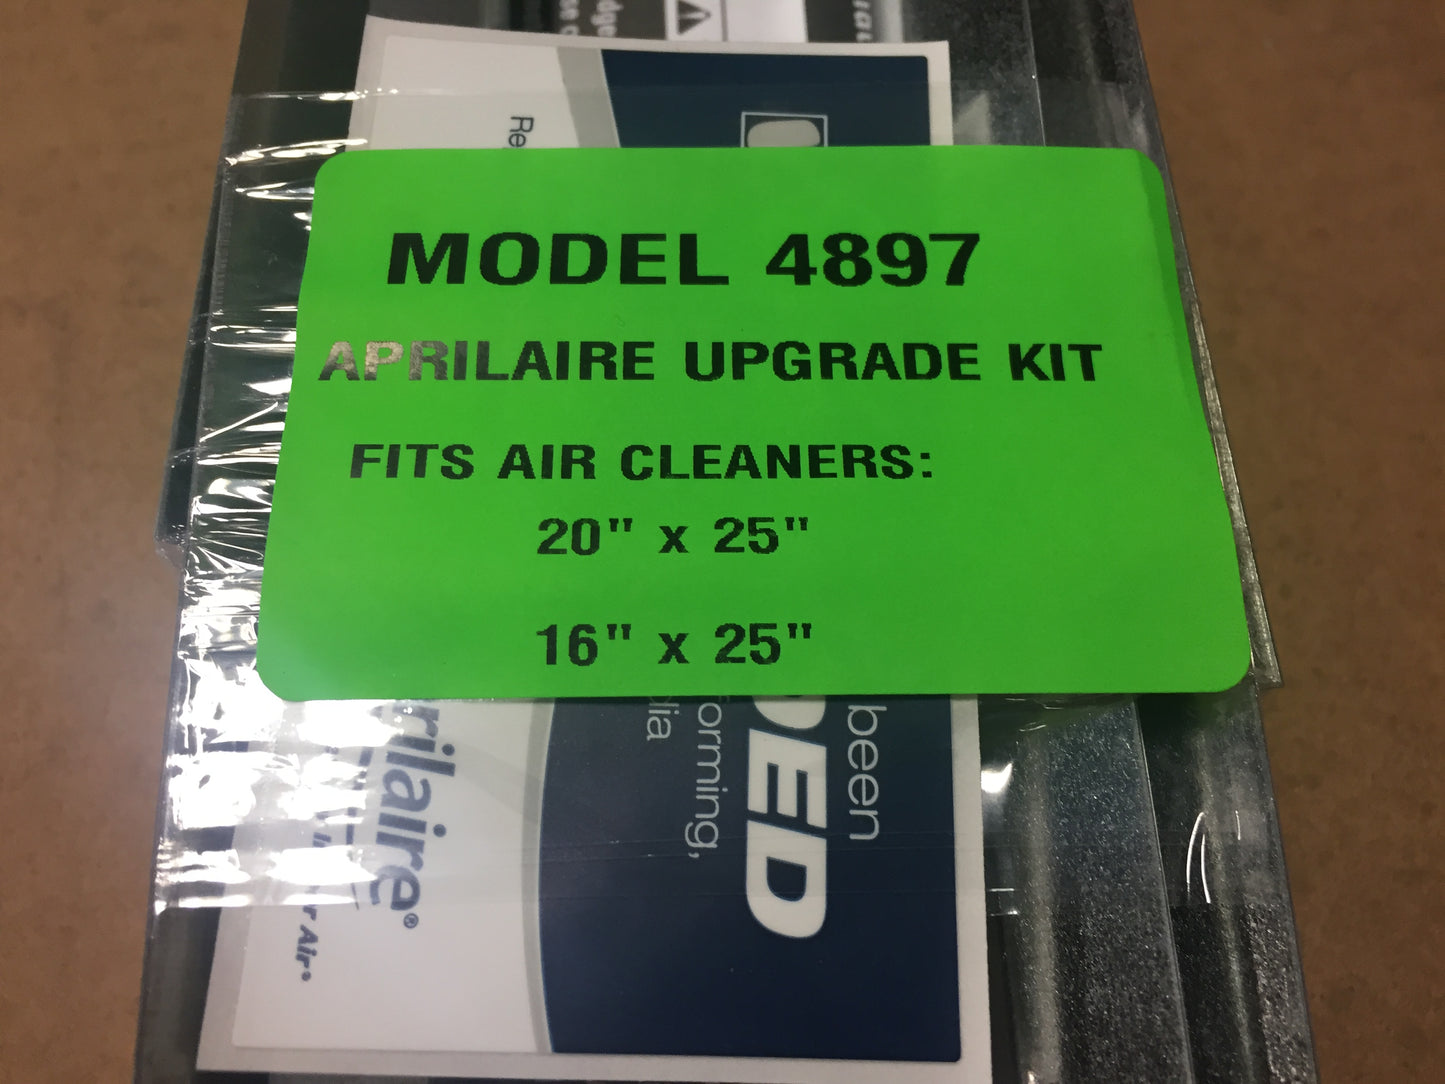 FILTER FRAME UPGRADE KIT FOR 5000 SERIES MEDIA AIR CLEANERS, SOLD AS 8 PER BOX